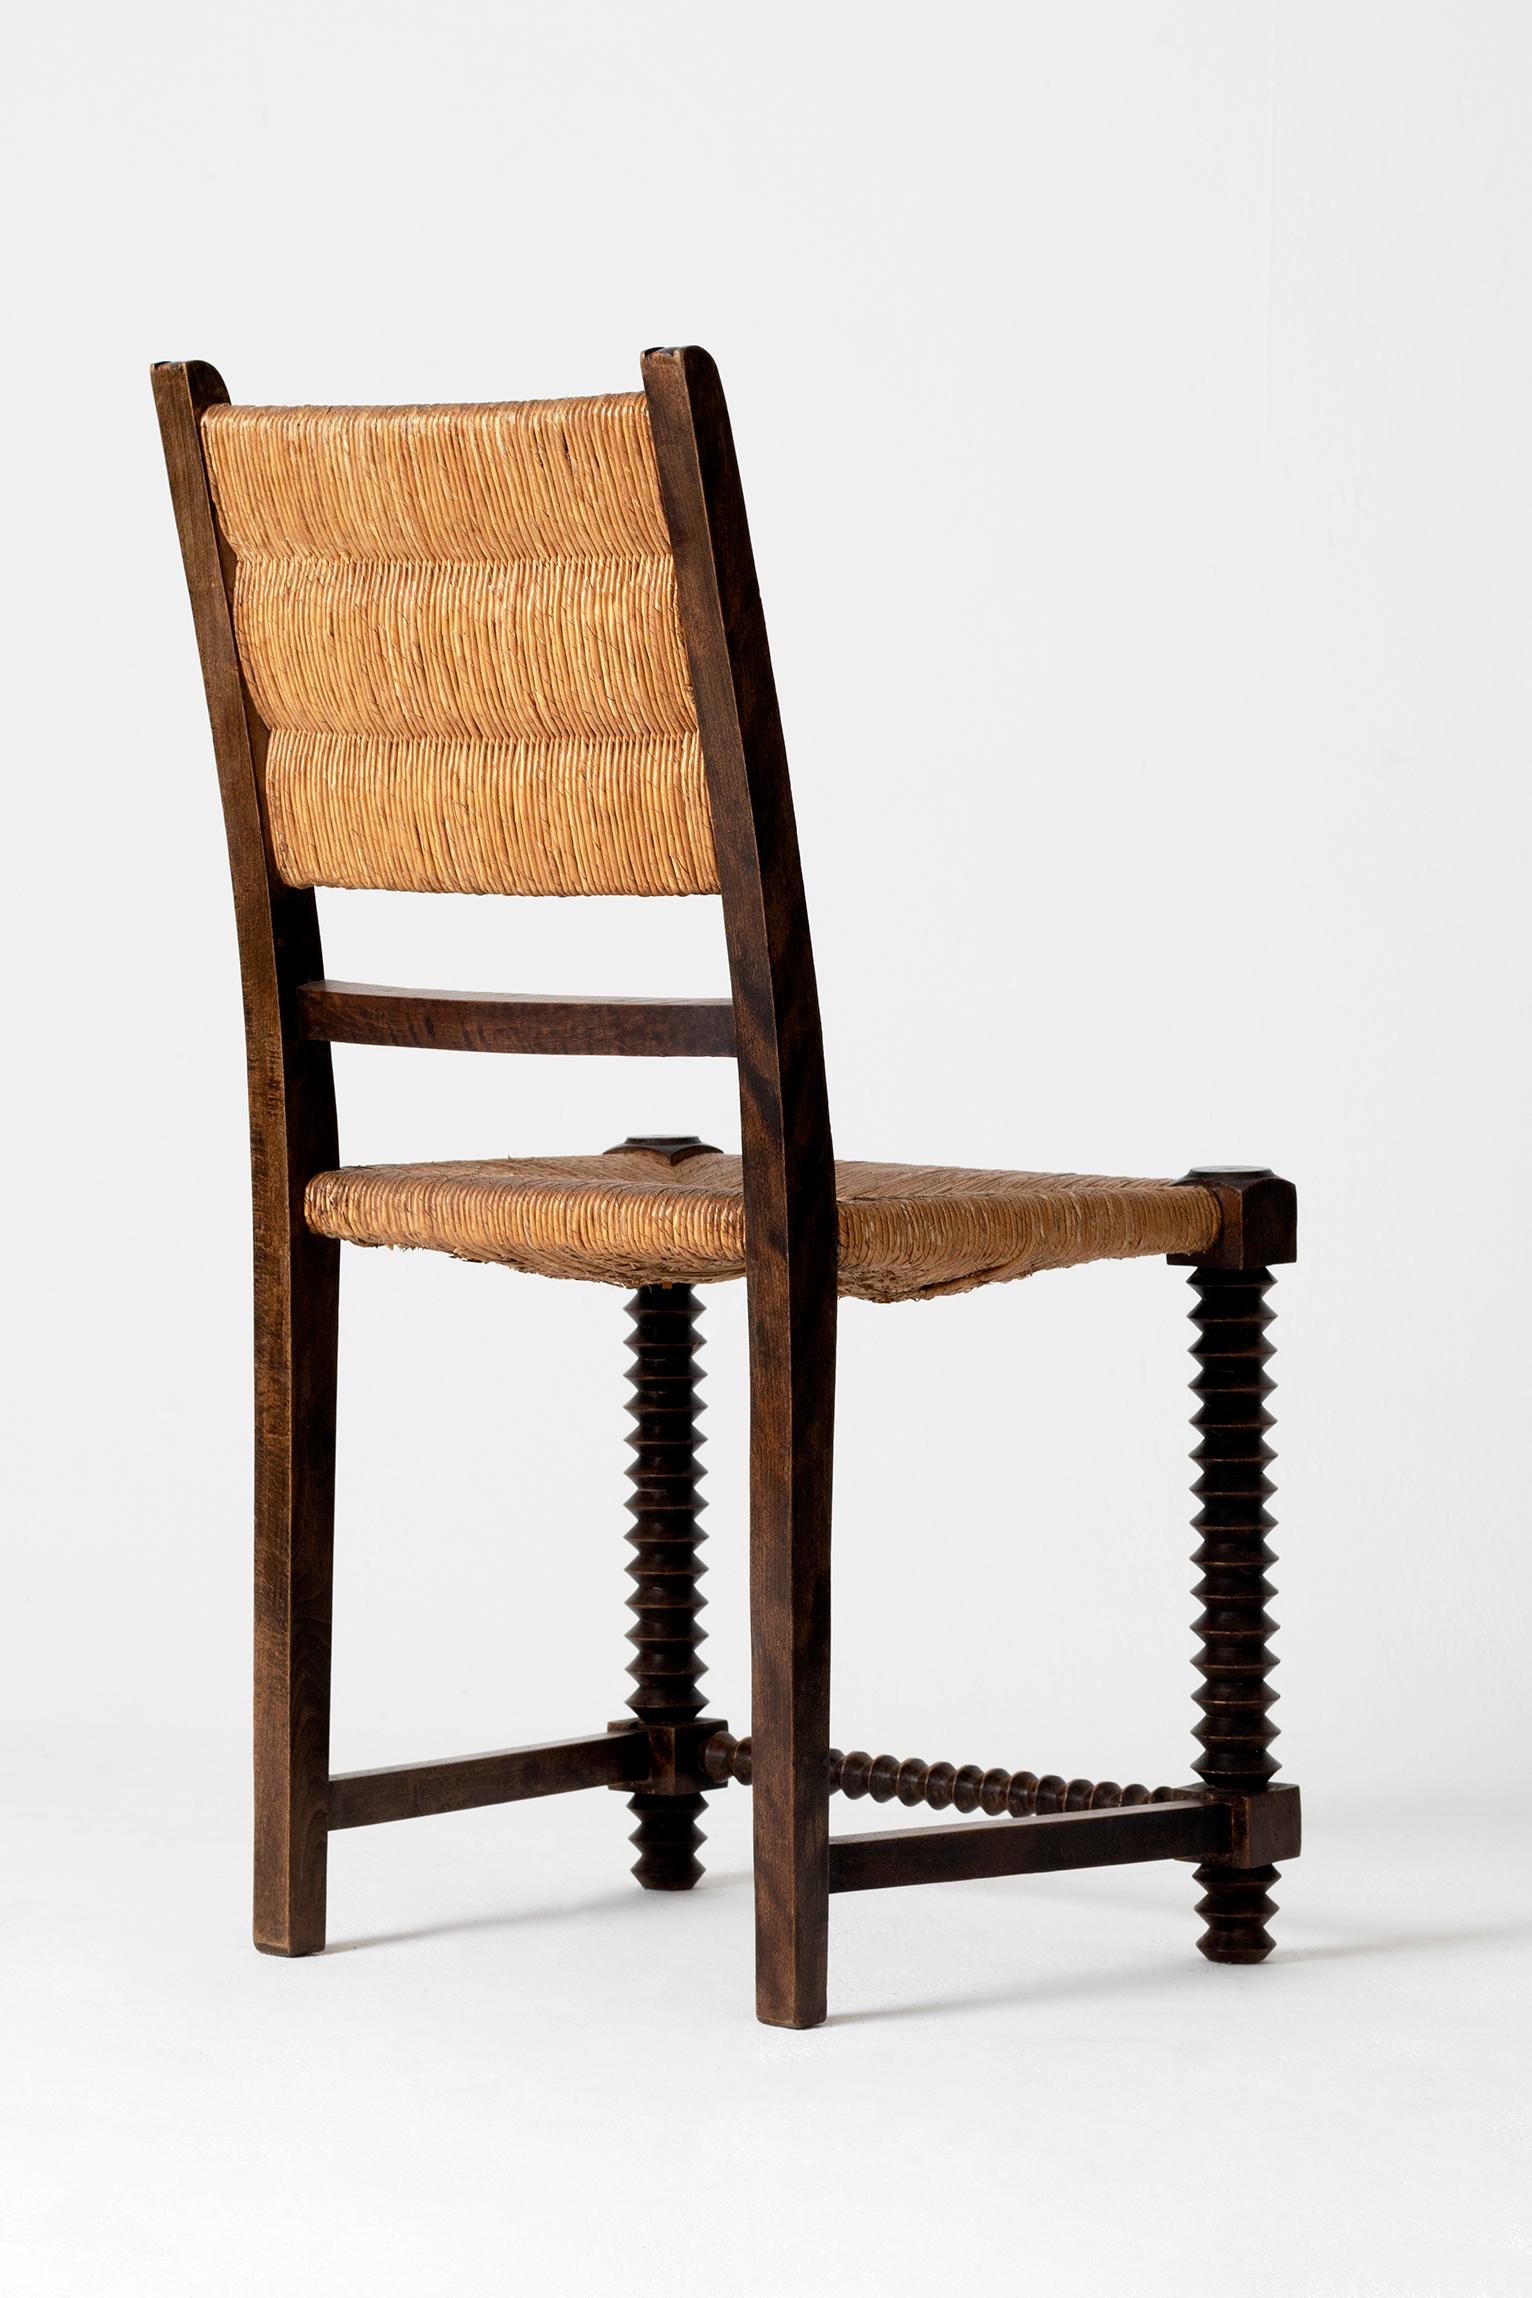 French Art Deco Chair by Victor Courtray